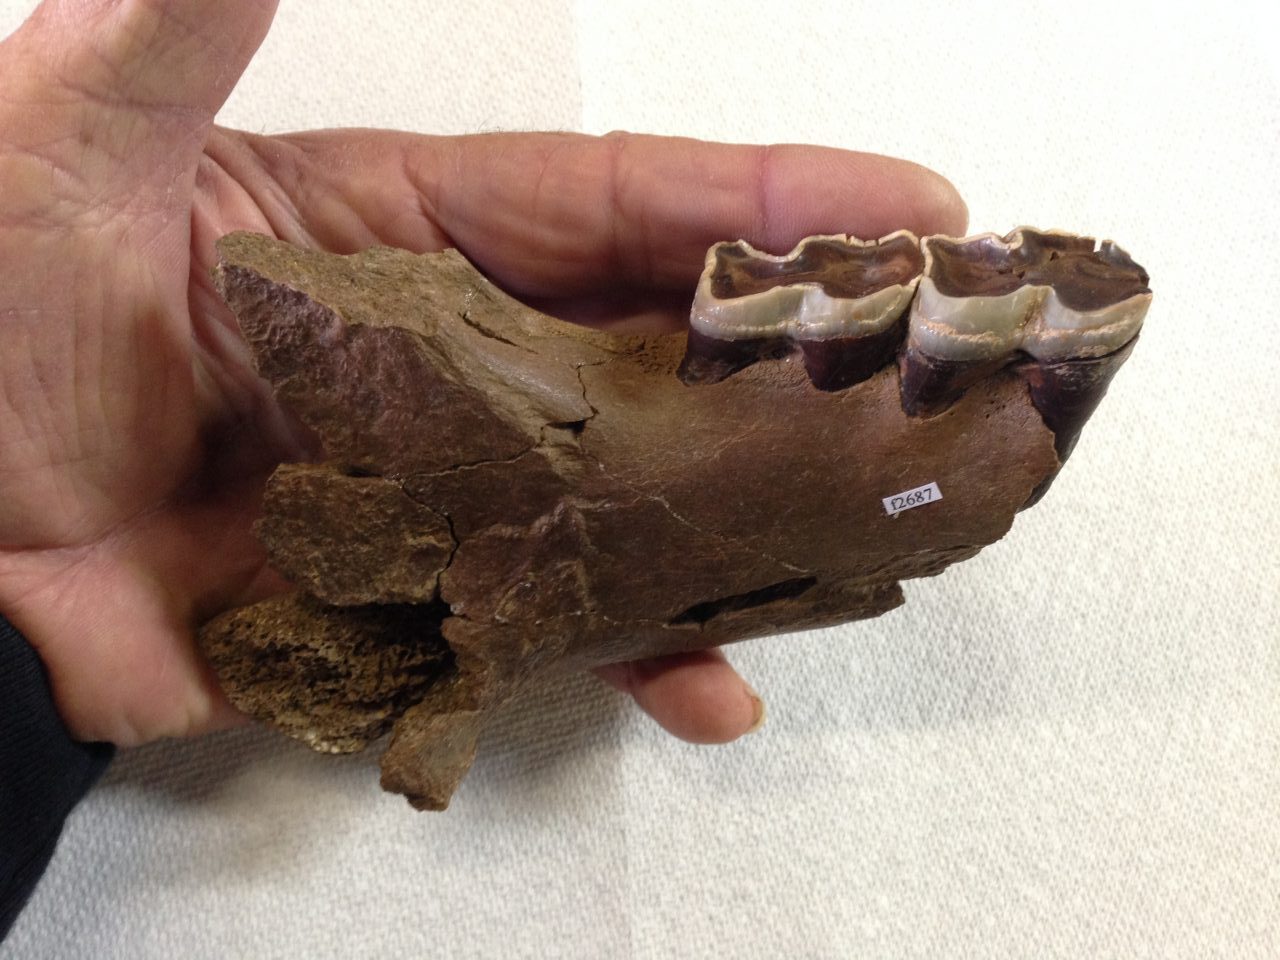 Rhinoceros Jaw Section with Two Teeth Menoceras | Fossils & Artifacts for Sale | Paleo Enterprises | Fossils & Artifacts for Sale